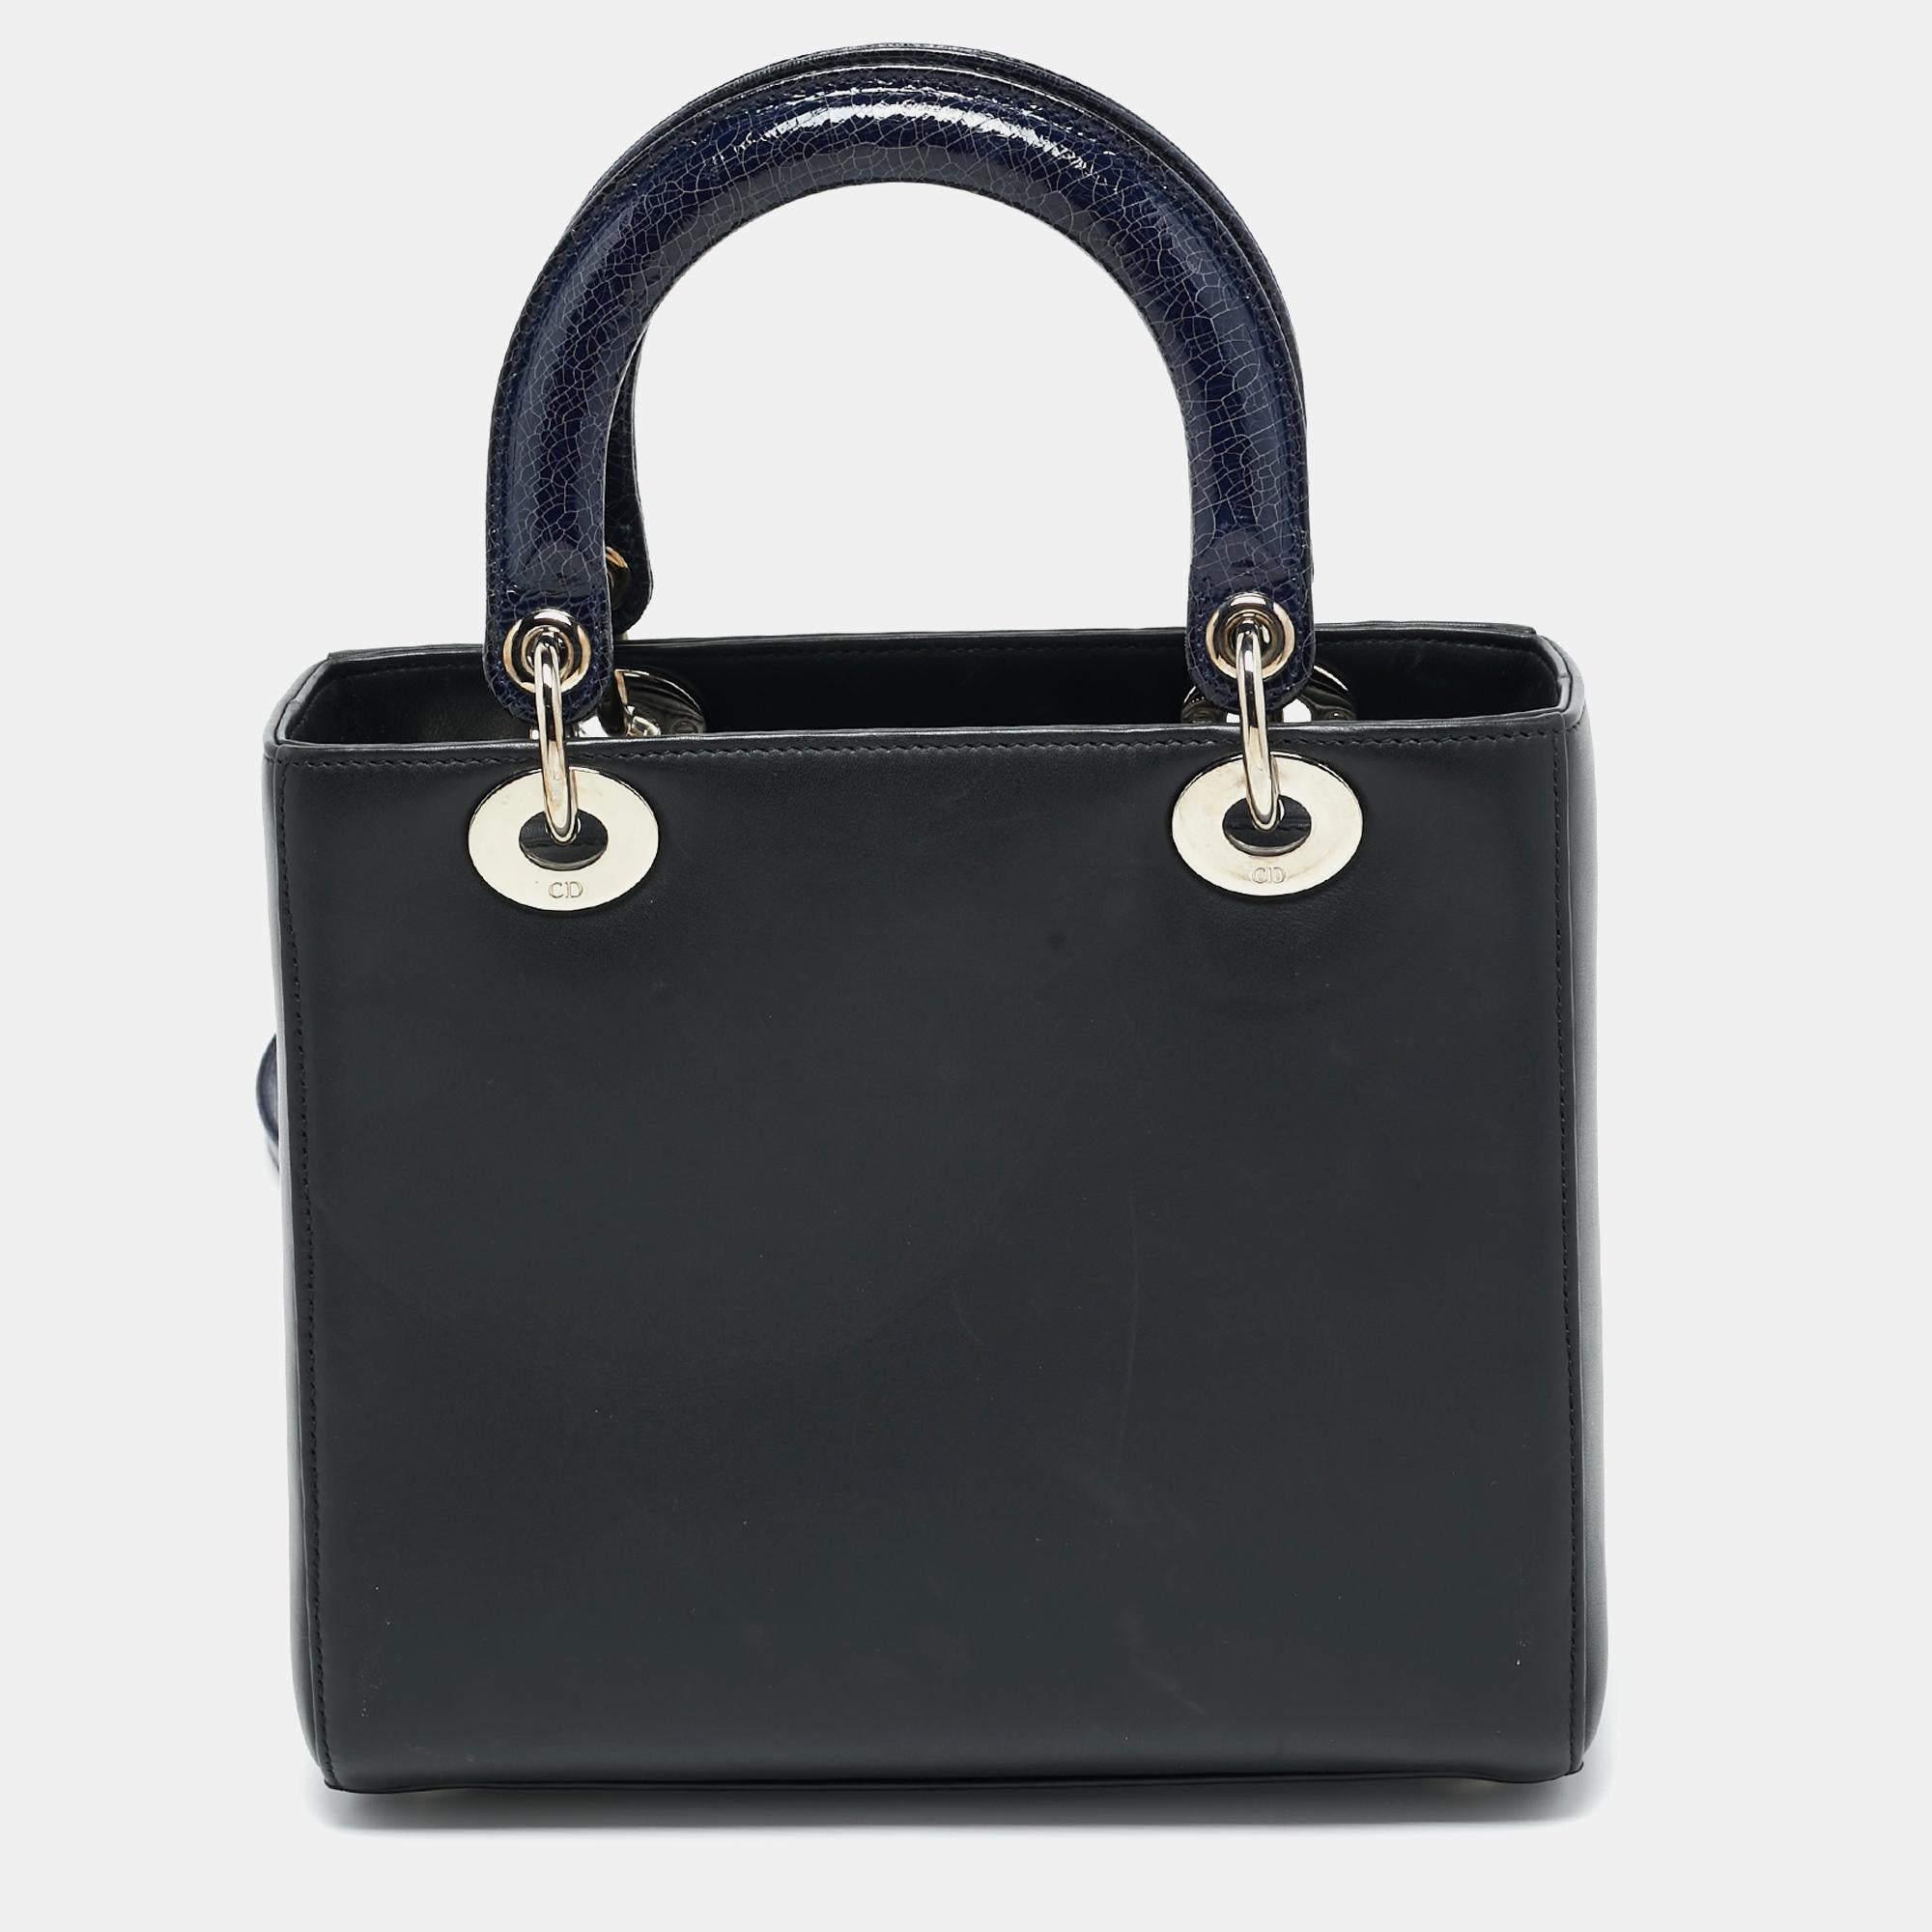 A timeless status and great design mark the Lady Dior tote. It is an iconic bag that people continue to invest in to this day. We have here this beauty crafted from leather and added with embellishments. The bag has a spacious leather-lined interior